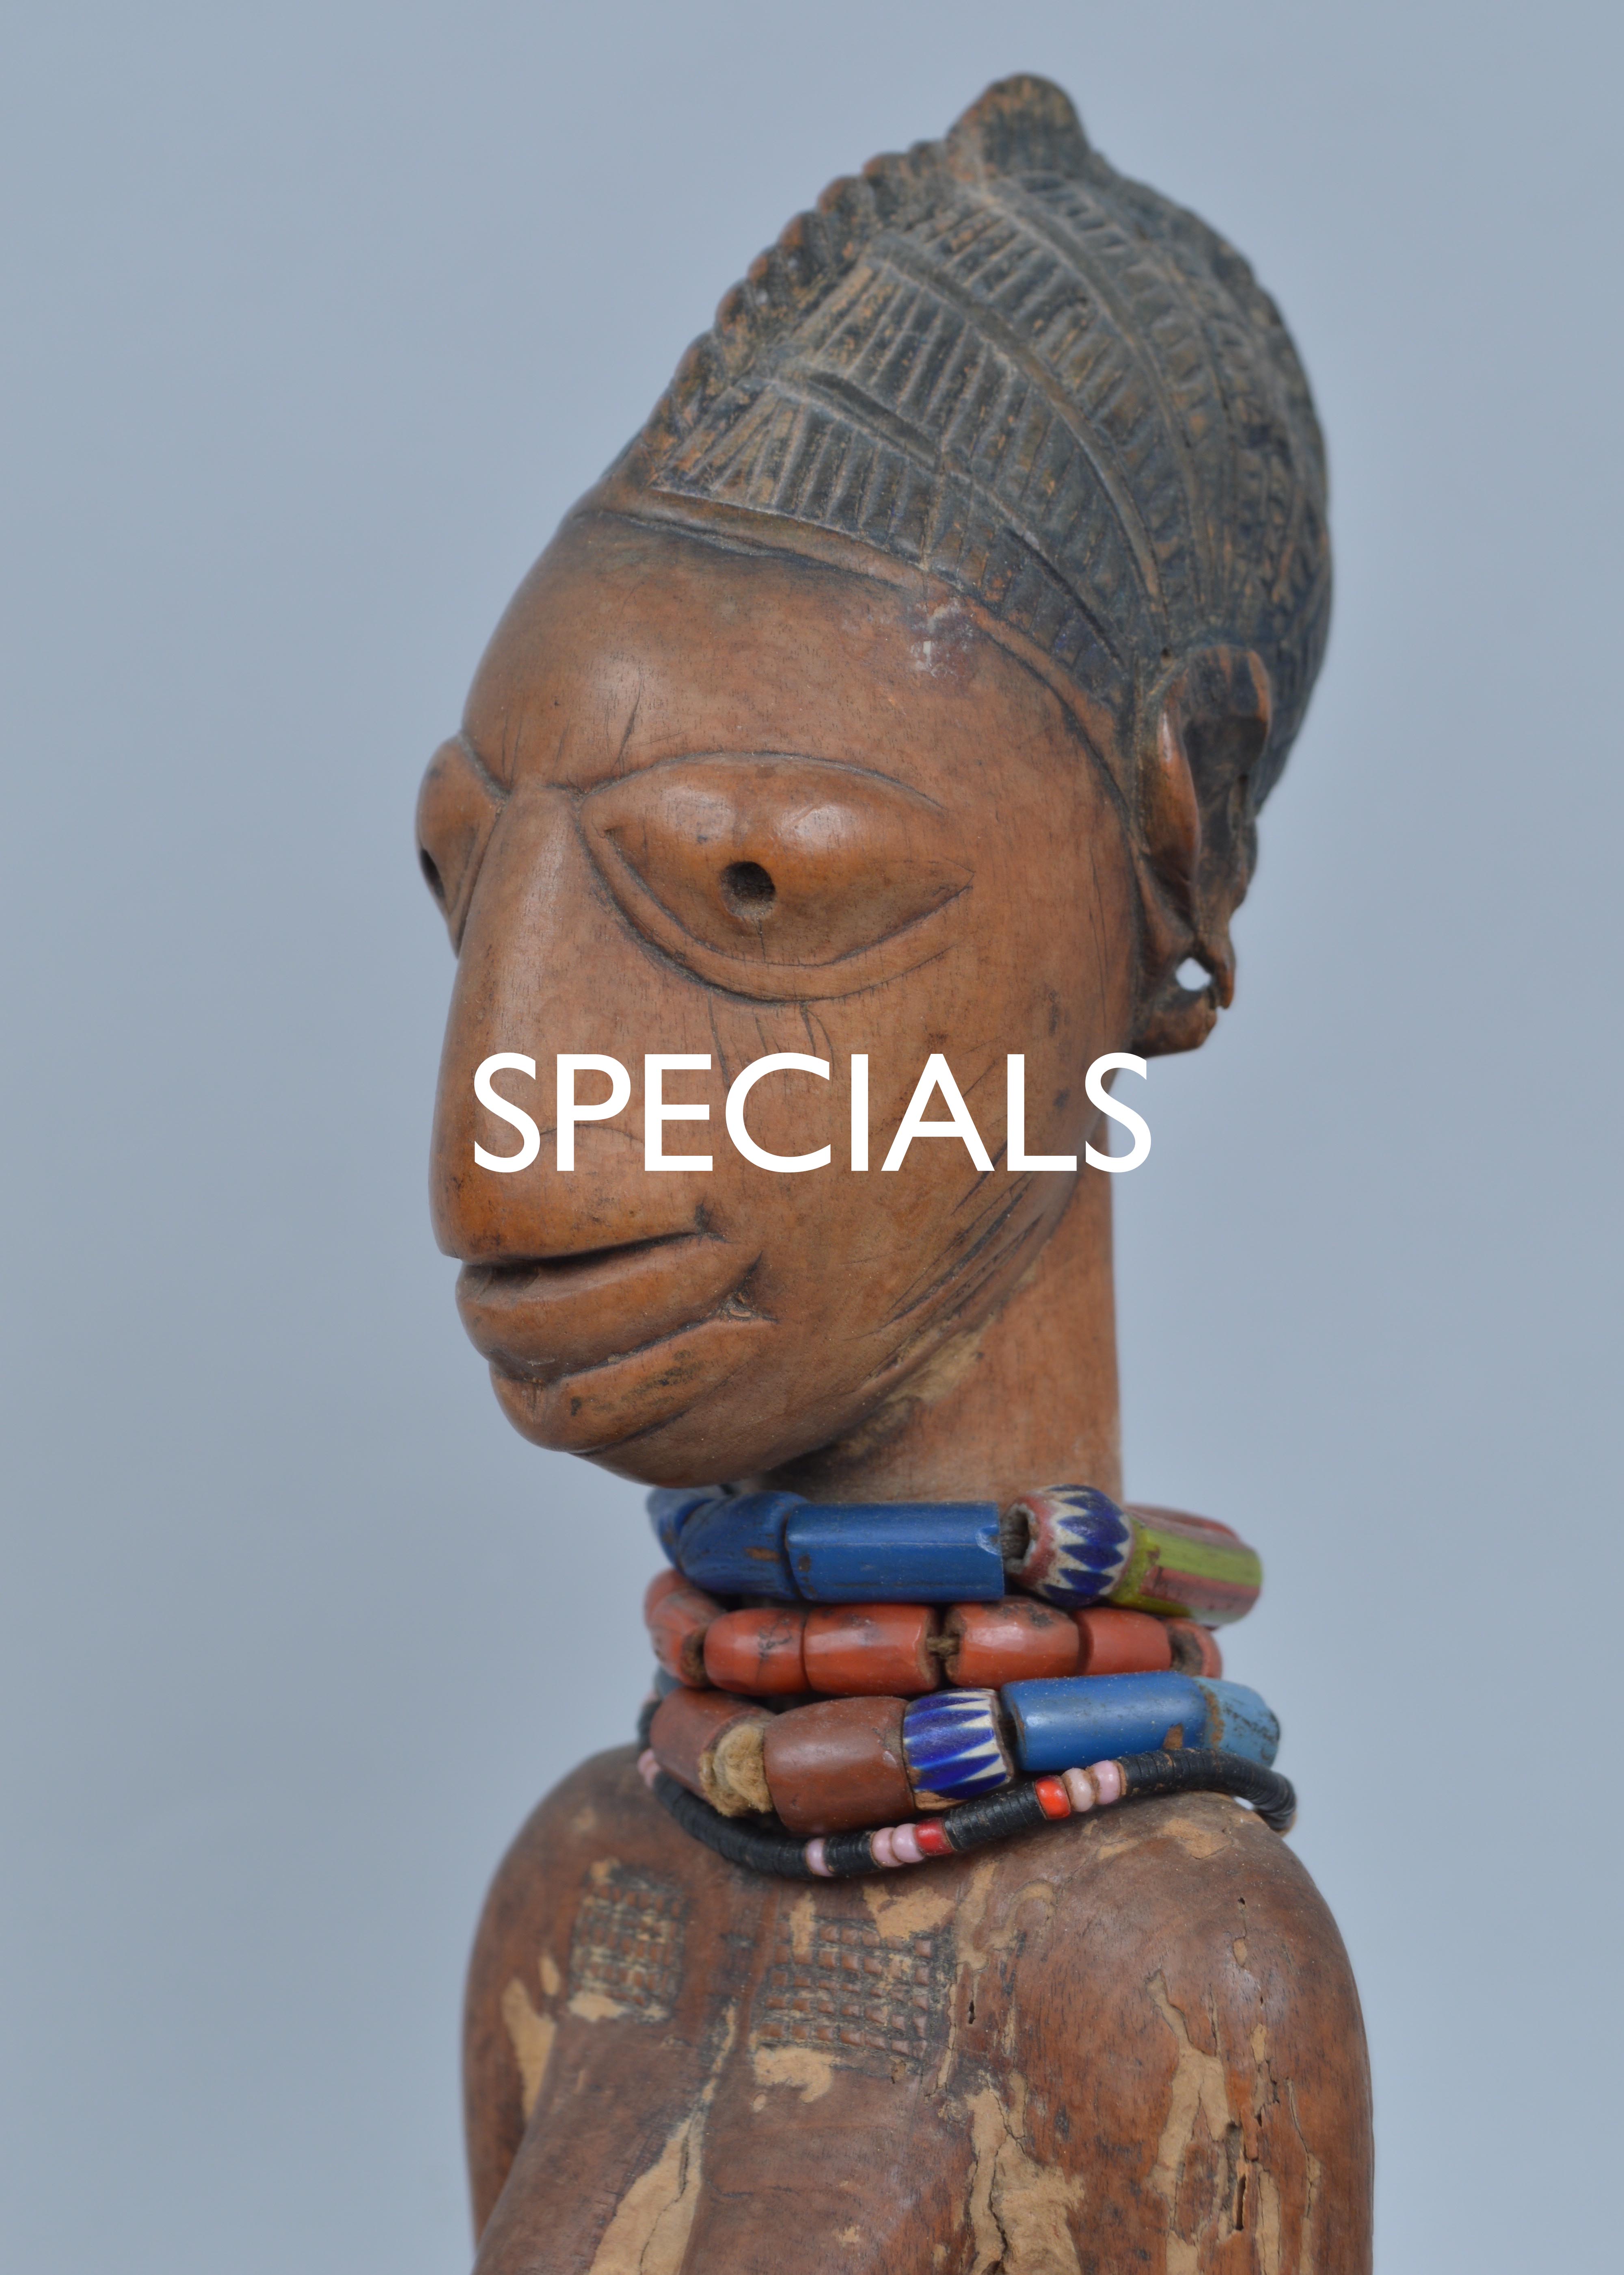 Traditional African Art - Specials